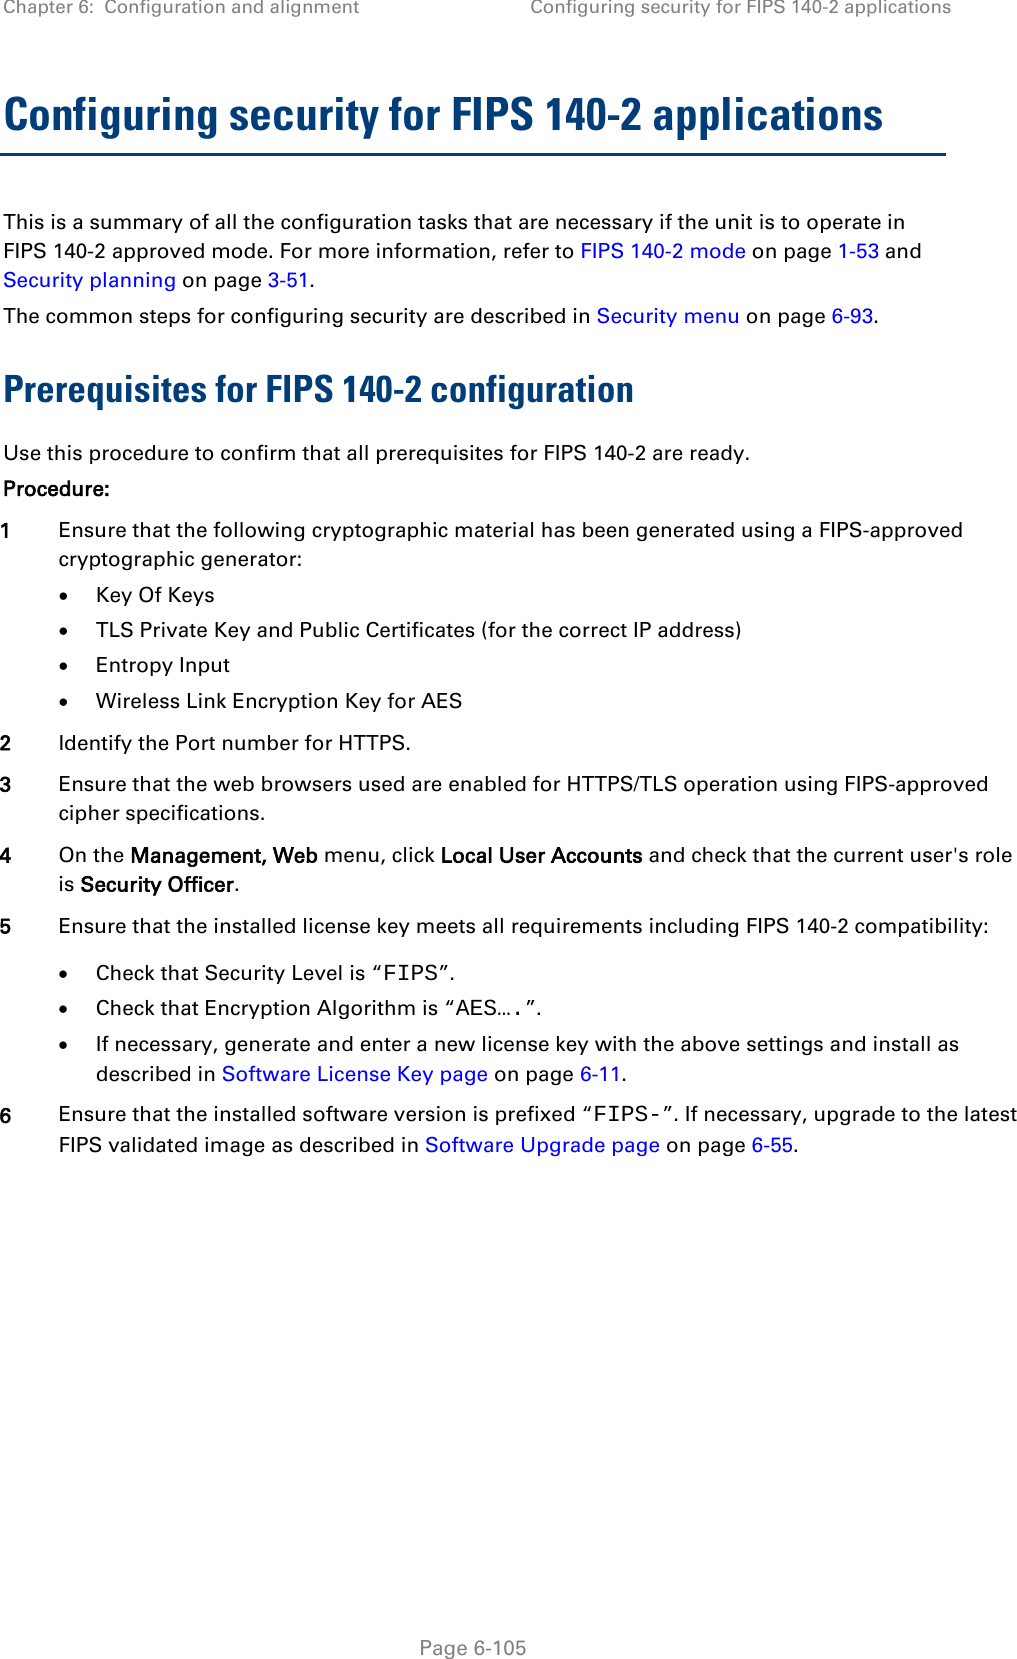 Chapter 6:  Configuration and alignment Configuring security for FIPS 140-2 applications  Configuring security for FIPS 140-2 applications This is a summary of all the configuration tasks that are necessary if the unit is to operate in FIPS 140-2 approved mode. For more information, refer to FIPS 140-2 mode on page 1-53 and Security planning on page 3-51. The common steps for configuring security are described in Security menu on page 6-93. Prerequisites for FIPS 140-2 configuration Use this procedure to confirm that all prerequisites for FIPS 140-2 are ready. Procedure: 1 Ensure that the following cryptographic material has been generated using a FIPS-approved cryptographic generator: • Key Of Keys • TLS Private Key and Public Certificates (for the correct IP address) • Entropy Input • Wireless Link Encryption Key for AES 2 Identify the Port number for HTTPS. 3 Ensure that the web browsers used are enabled for HTTPS/TLS operation using FIPS-approved cipher specifications. 4 On the Management, Web menu, click Local User Accounts and check that the current user&apos;s role is Security Officer. 5 Ensure that the installed license key meets all requirements including FIPS 140-2 compatibility: • Check that Security Level is “FIPS”. • Check that Encryption Algorithm is “AES….”. • If necessary, generate and enter a new license key with the above settings and install as described in Software License Key page on page 6-11. 6 Ensure that the installed software version is prefixed “FIPS-”. If necessary, upgrade to the latest FIPS validated image as described in Software Upgrade page on page 6-55.  Page 6-105 